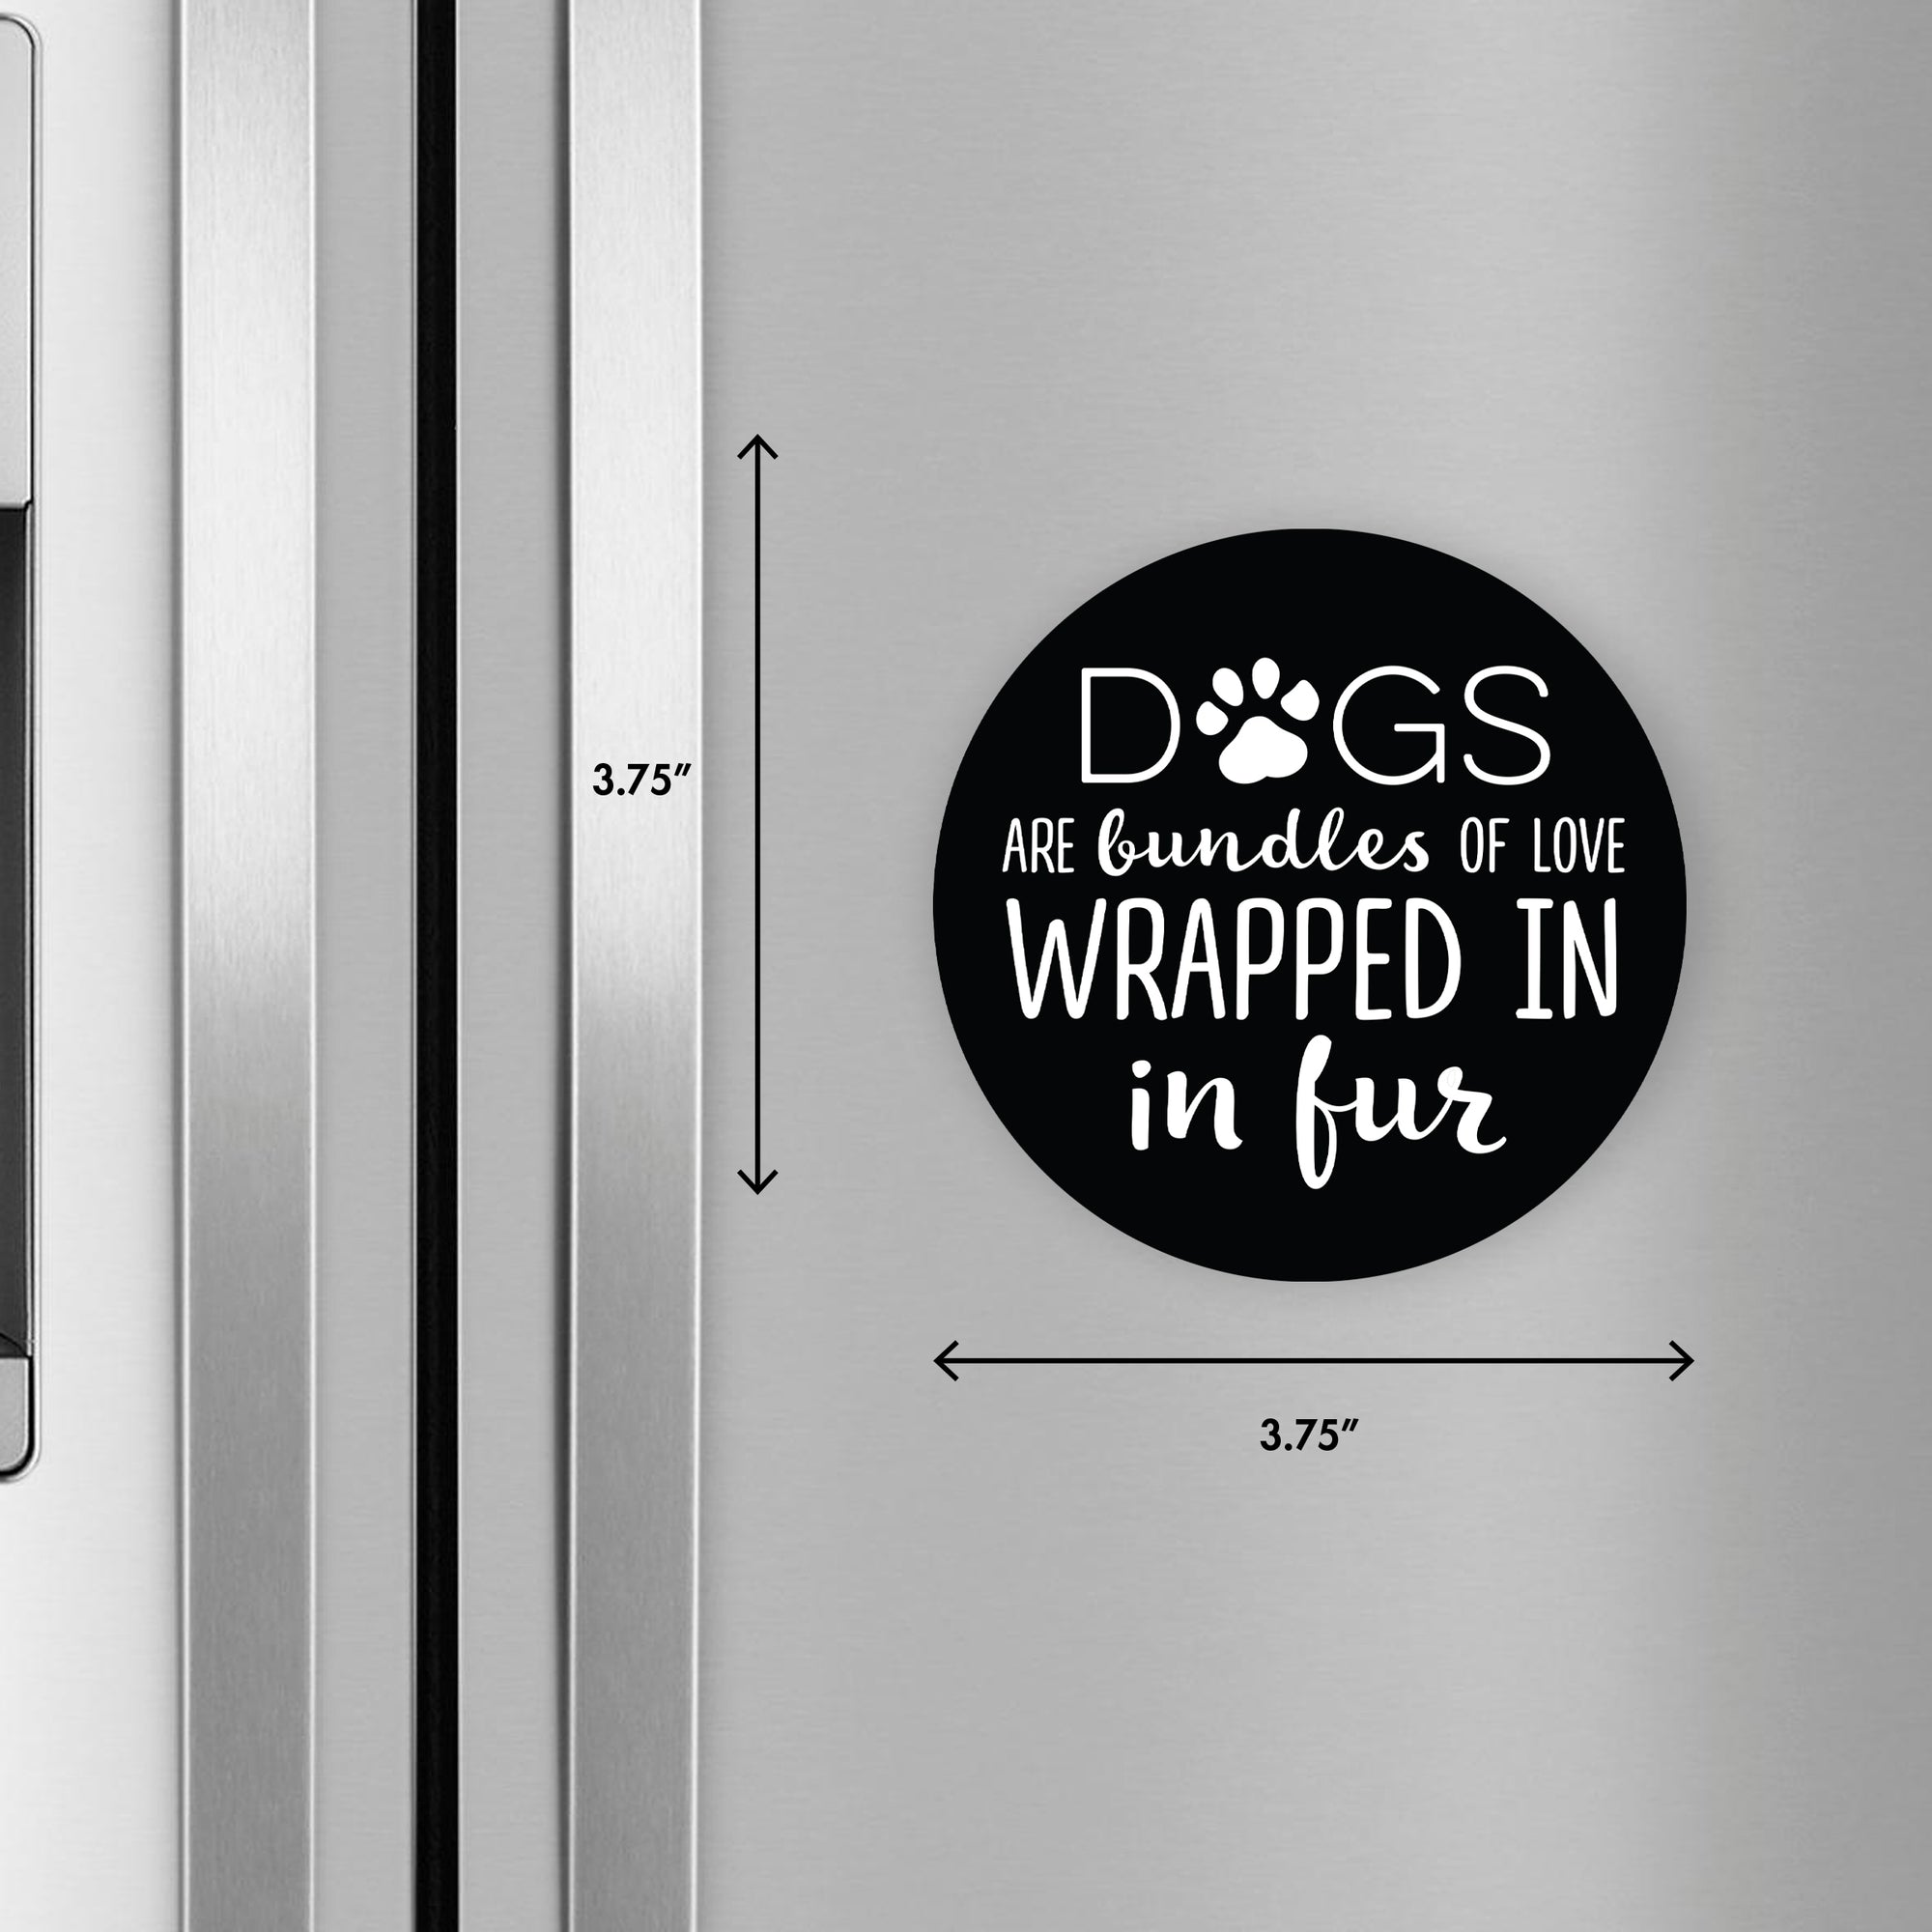 Refrigerator Magnet Perfect Gift Idea For Pet Owners - Dogs Are Bundles Of Love